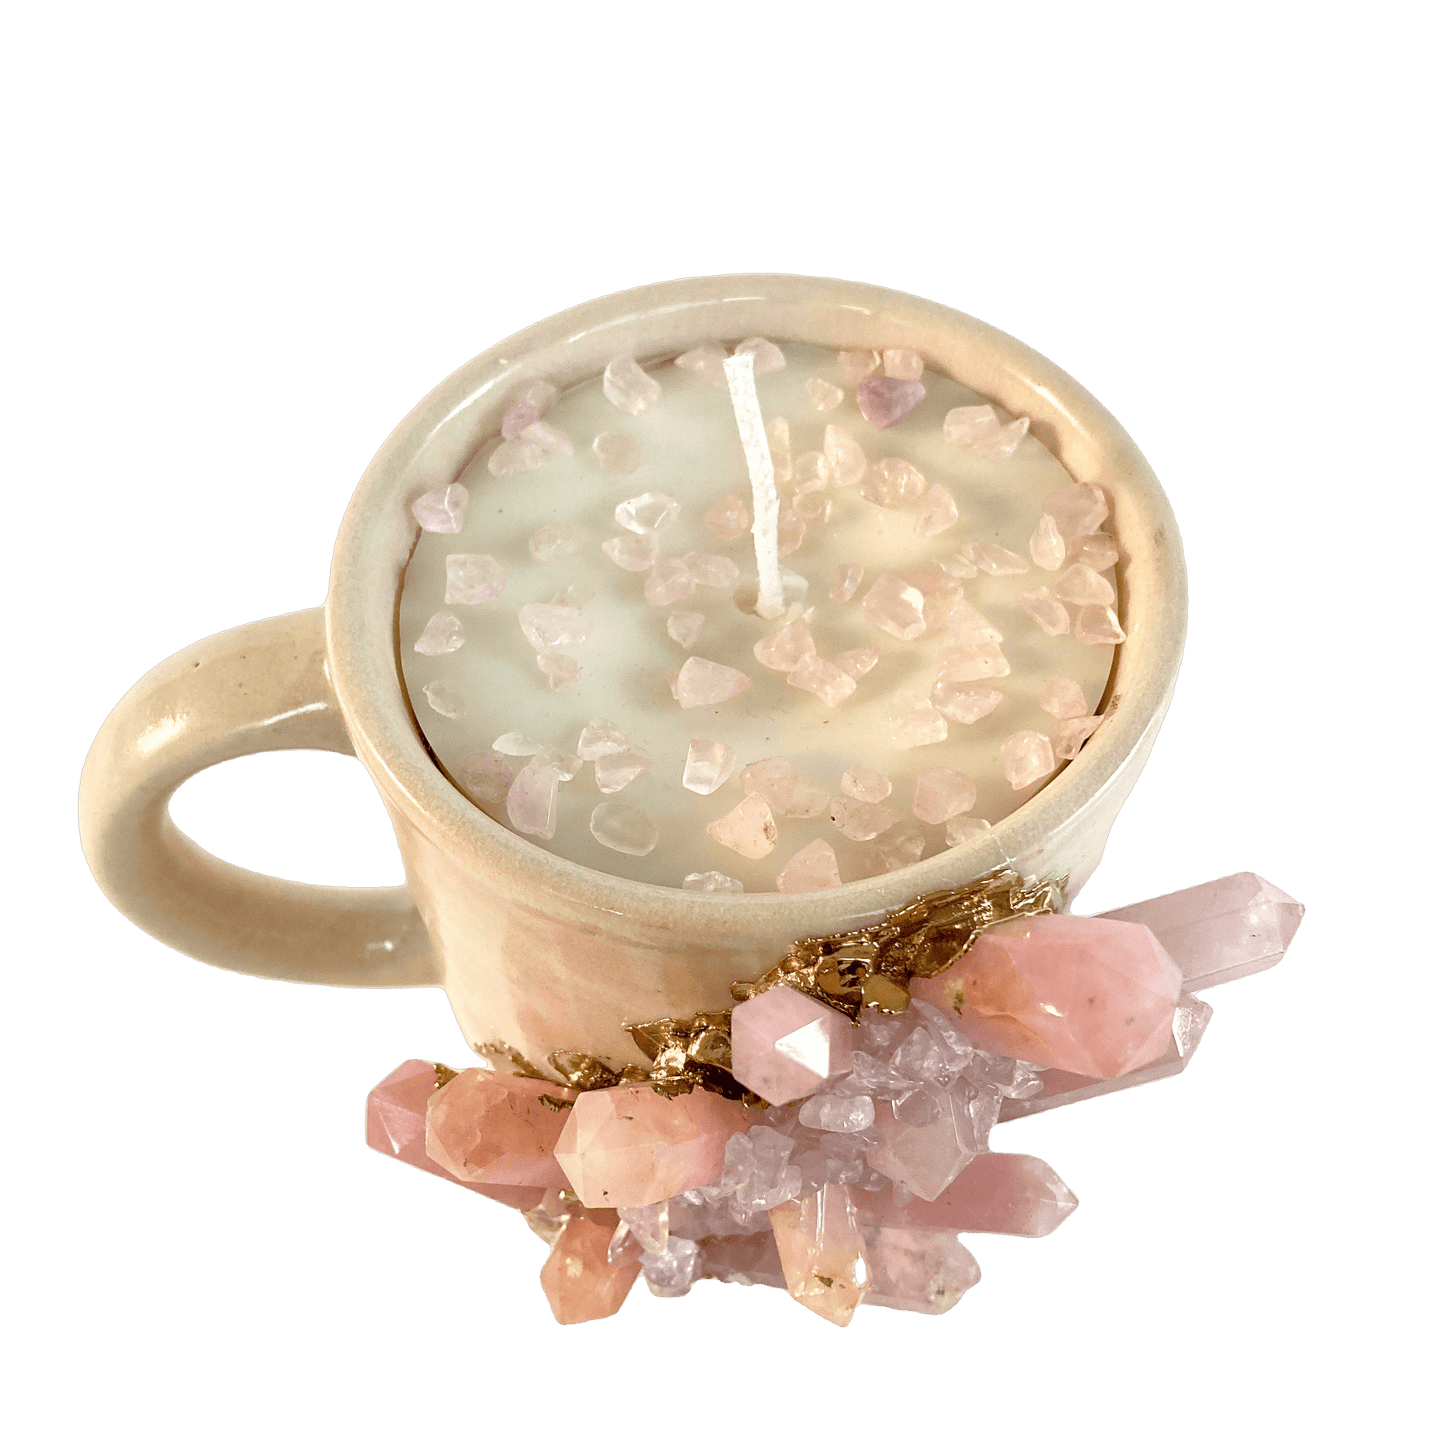 Pink Quartz Crystal Scented Soy Candles in Coffee Mug - Set of 2 - MAIA HOMES